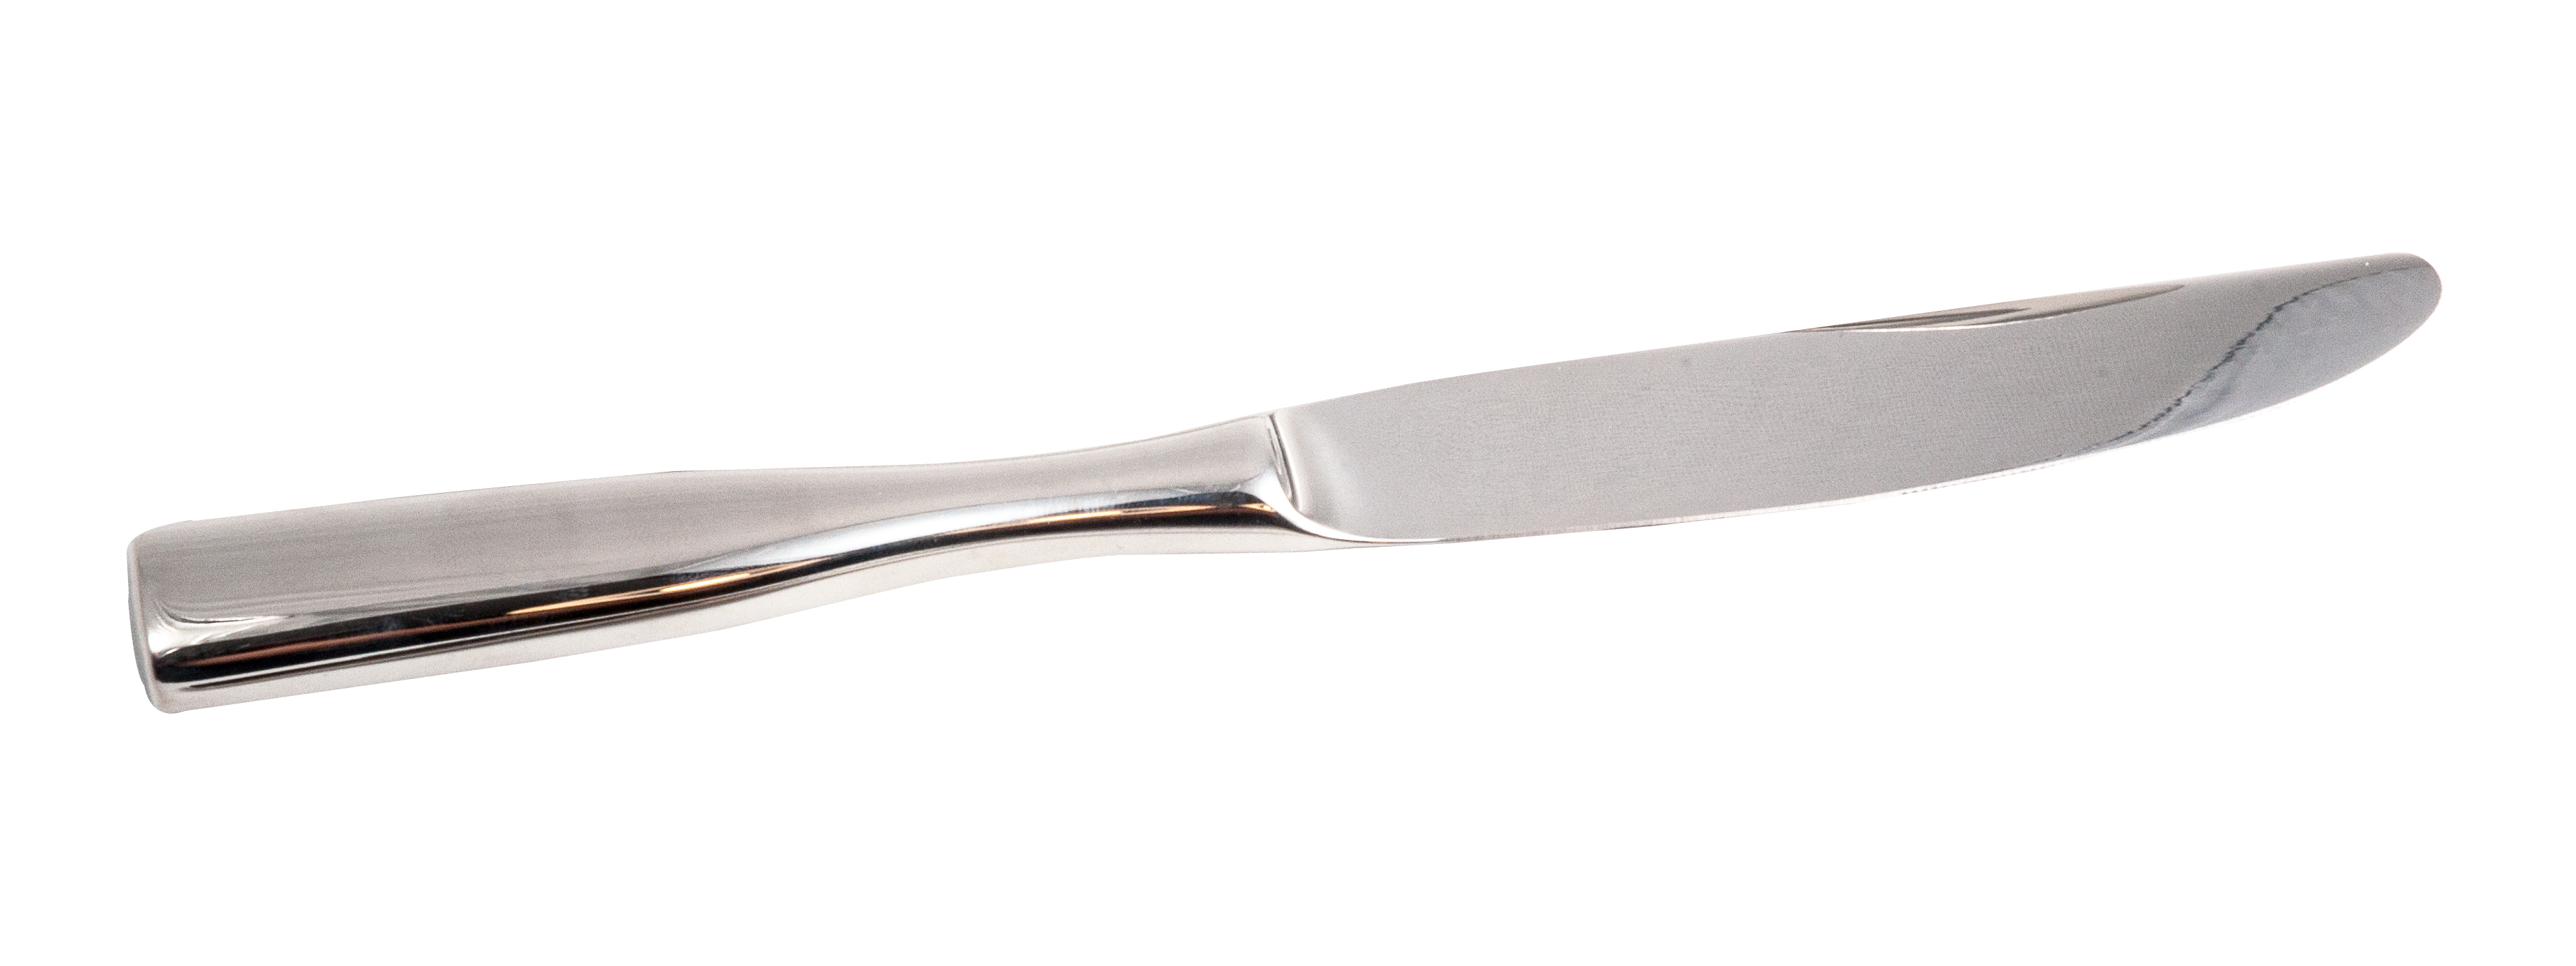 A Silver Knife With A Black Background